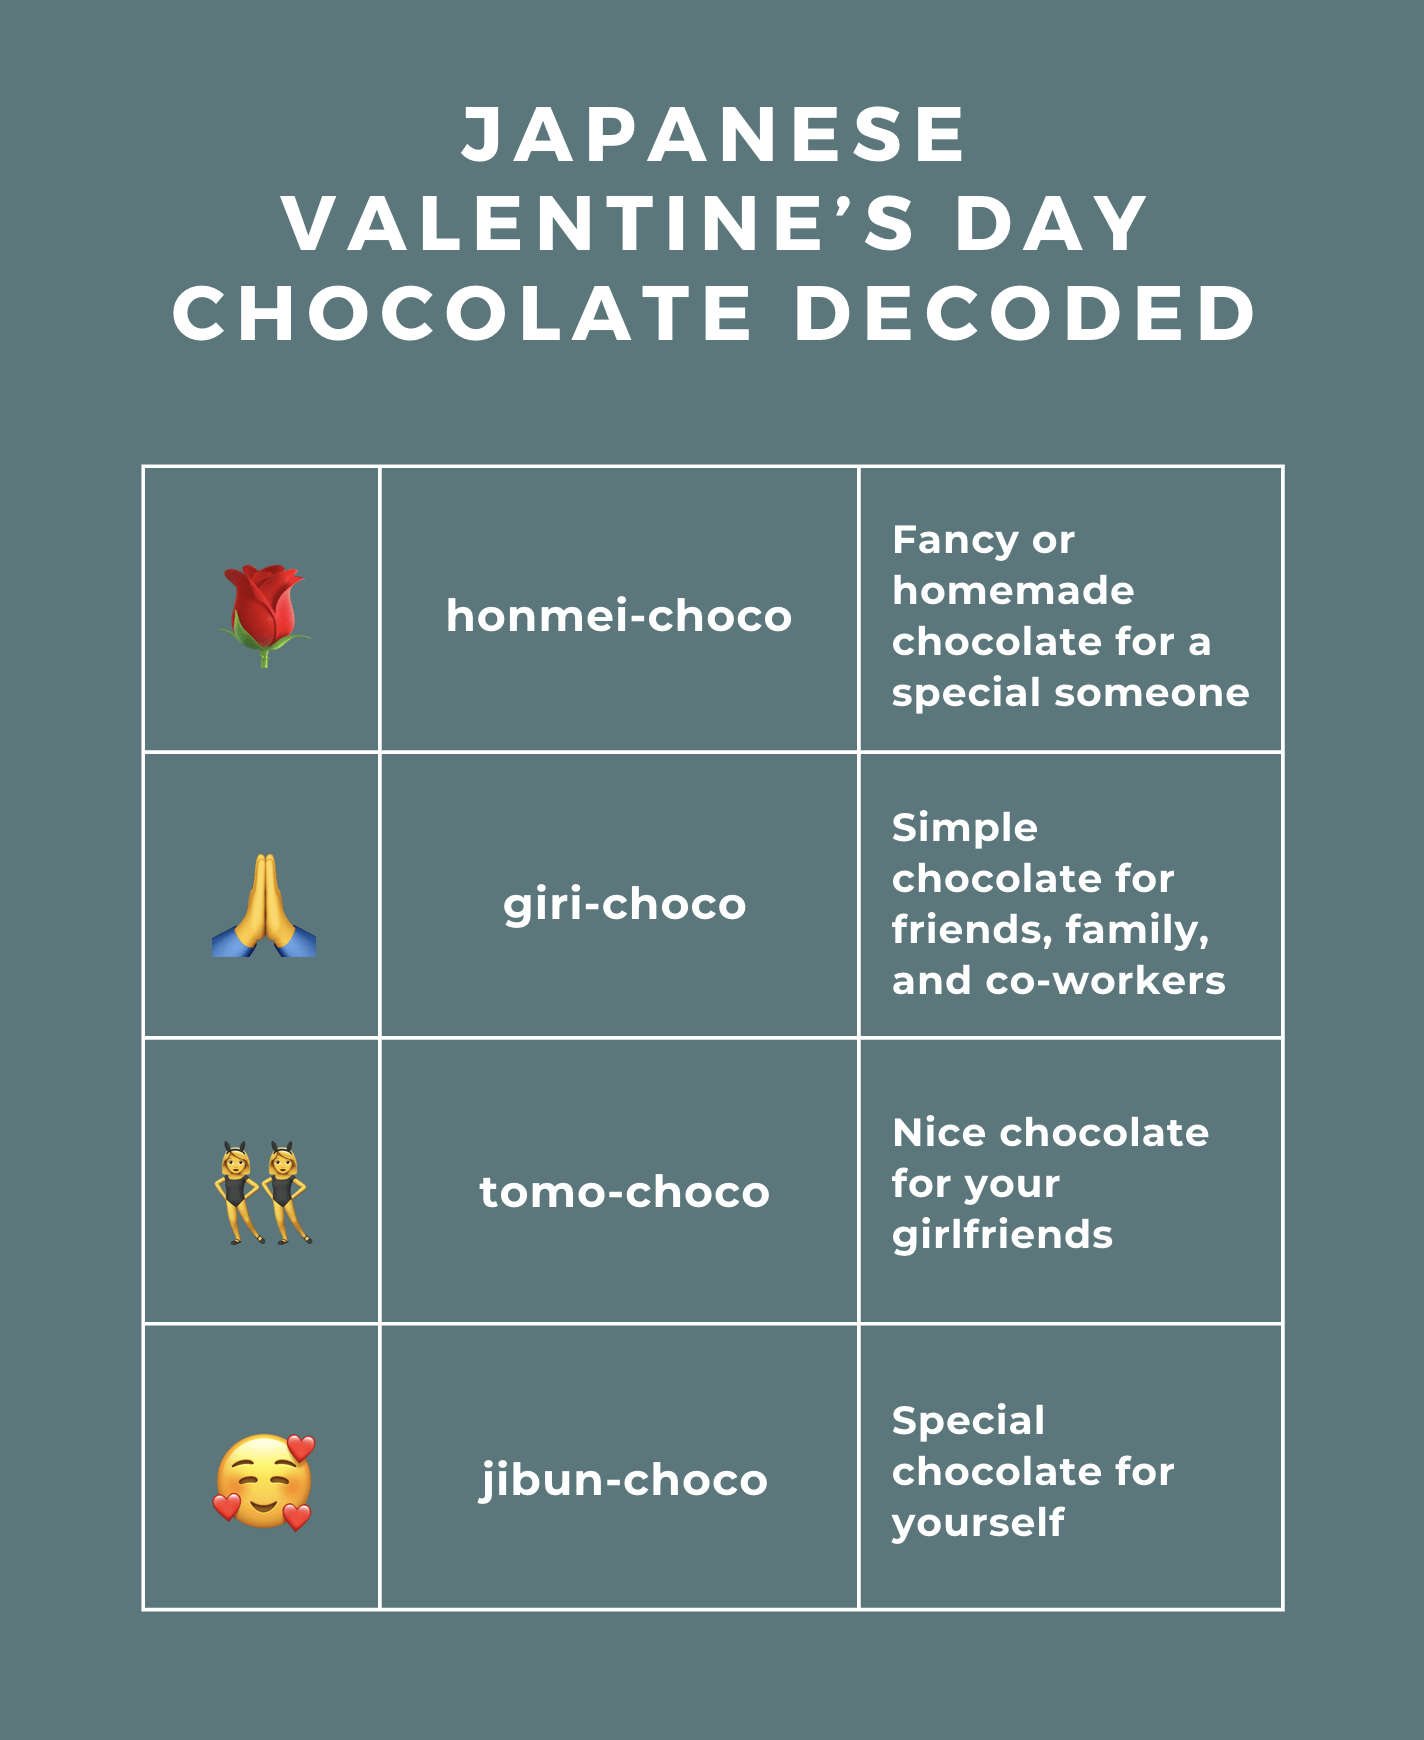 A chart explaining the different Japanese Valentine's Day chocolate meanings. Honmei-choco= fancy or homemade chocolate for a special someone. Giri-choco= simple chocolate for friends, family, and co-workers. Tomo-choco= nice chocolate for your girlfriends. Jibun-choco= special chocolate for yourself